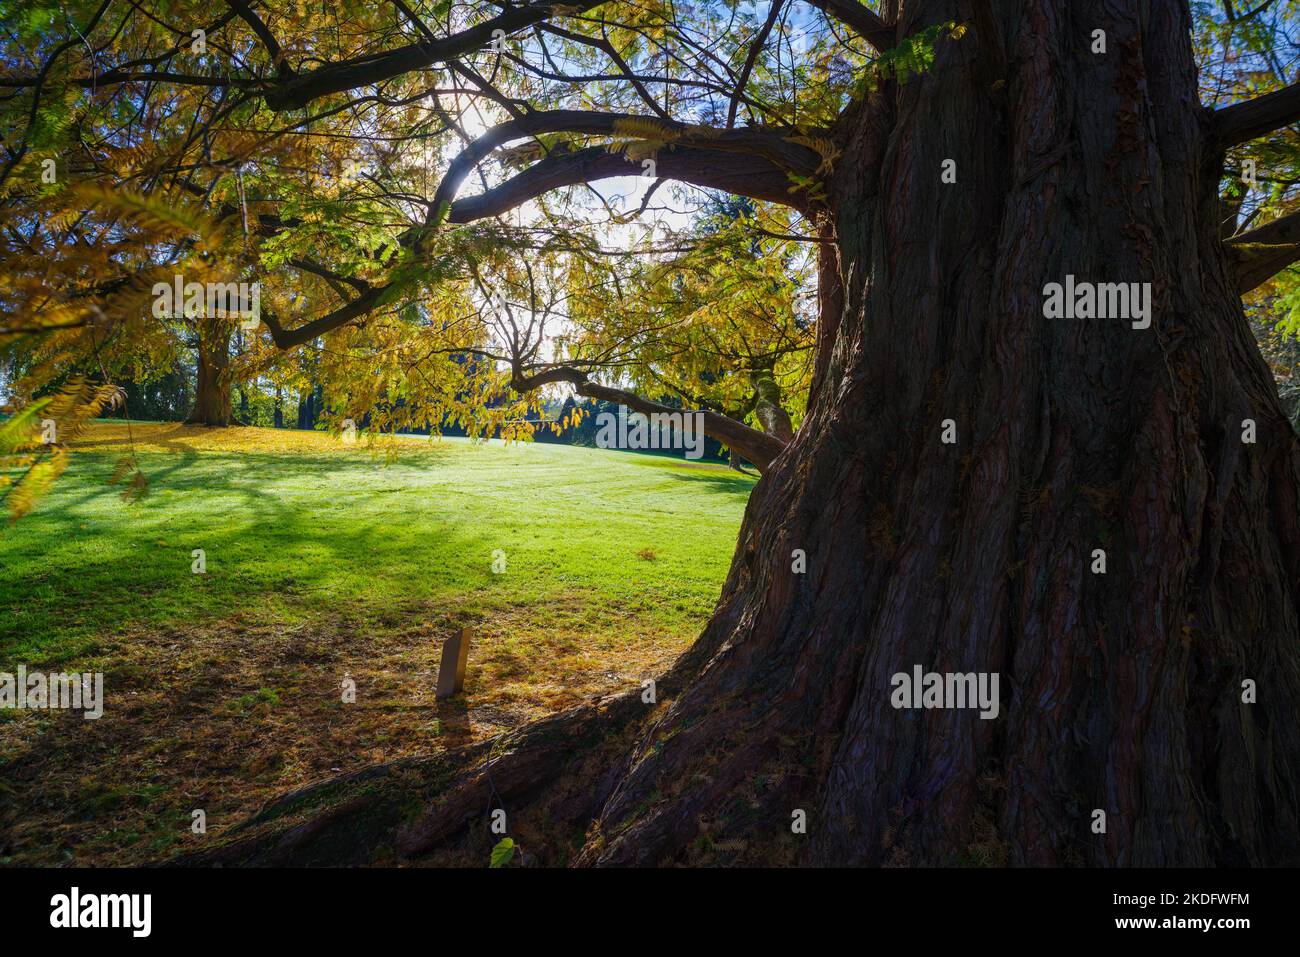 enormous tree trunk in an autumn park Stock Photo